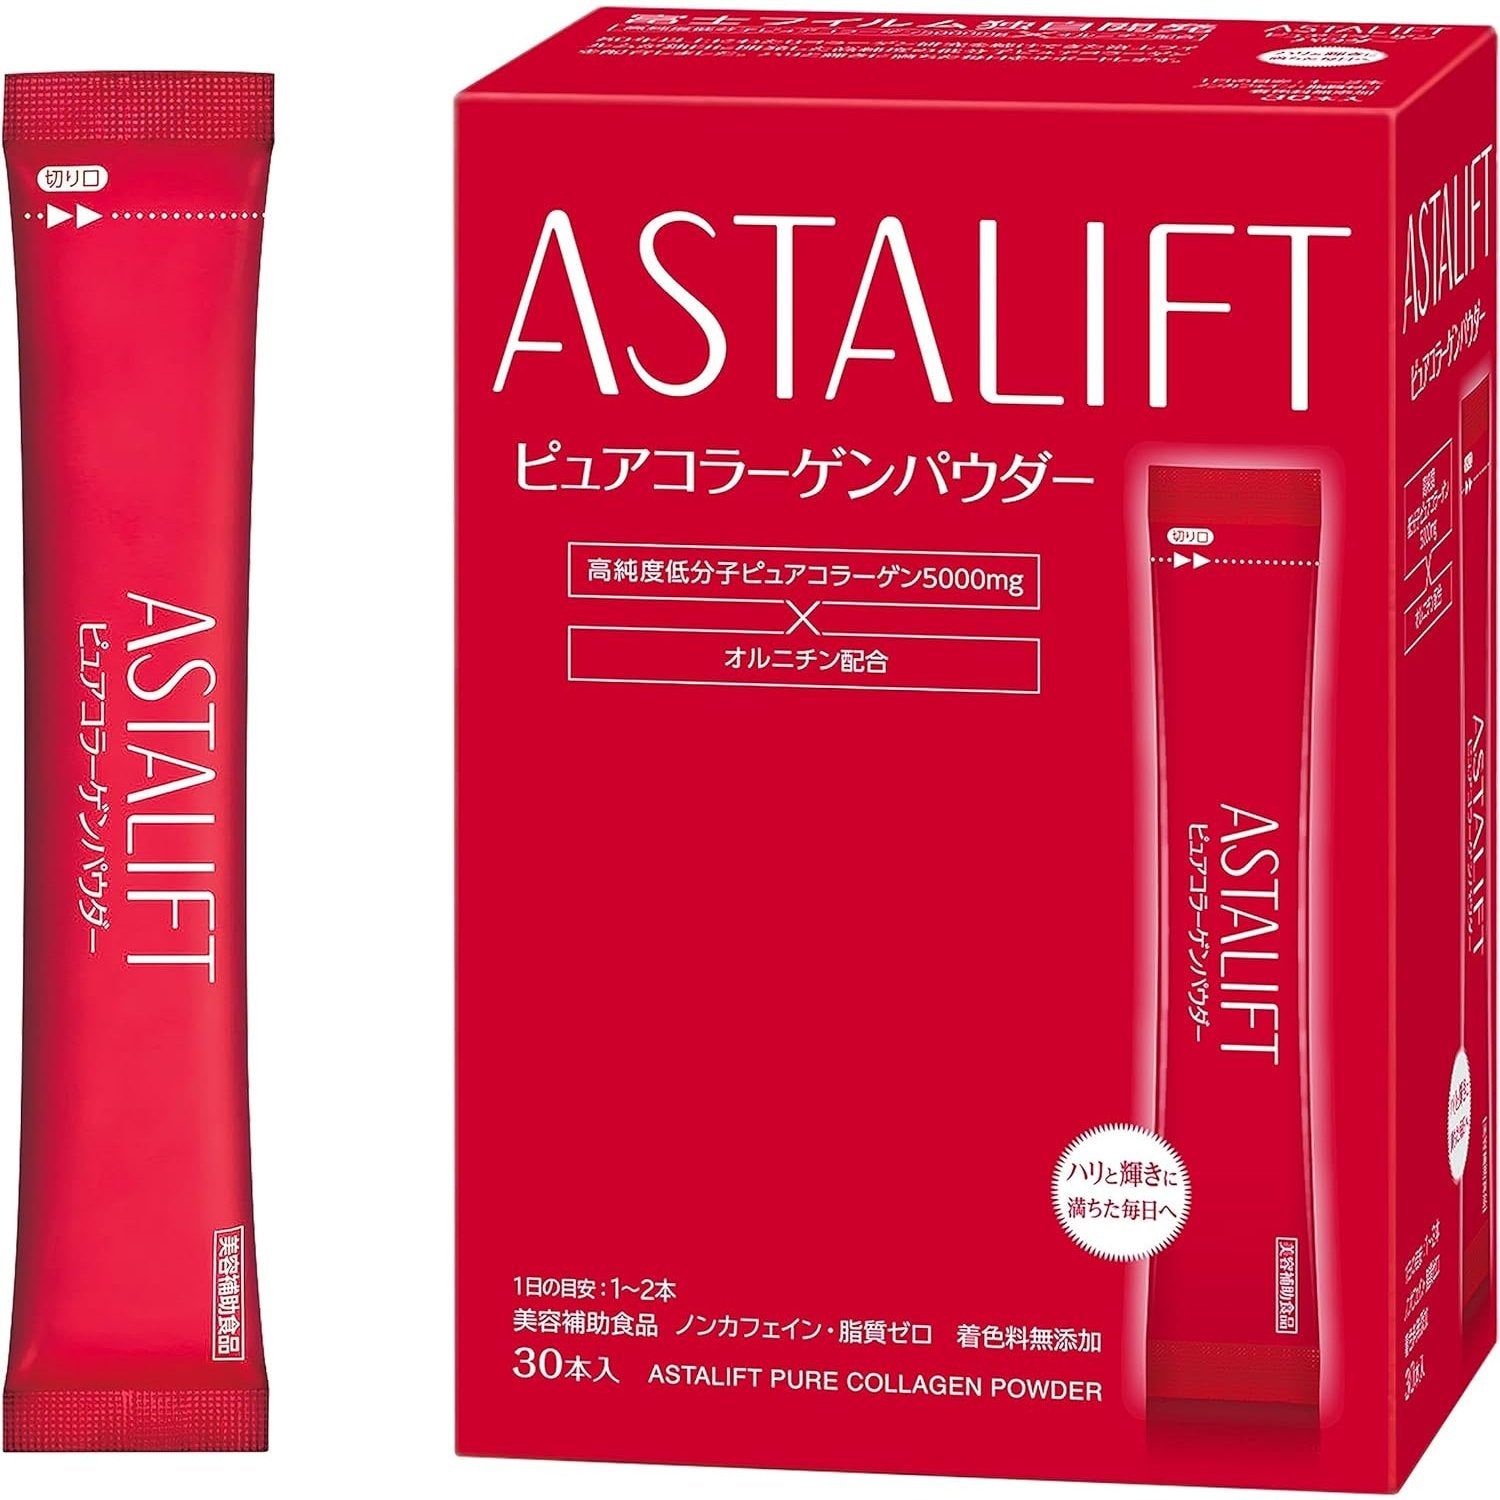 Astalift Pure Collagen Powder Single Serving Package Type 30 Sachets